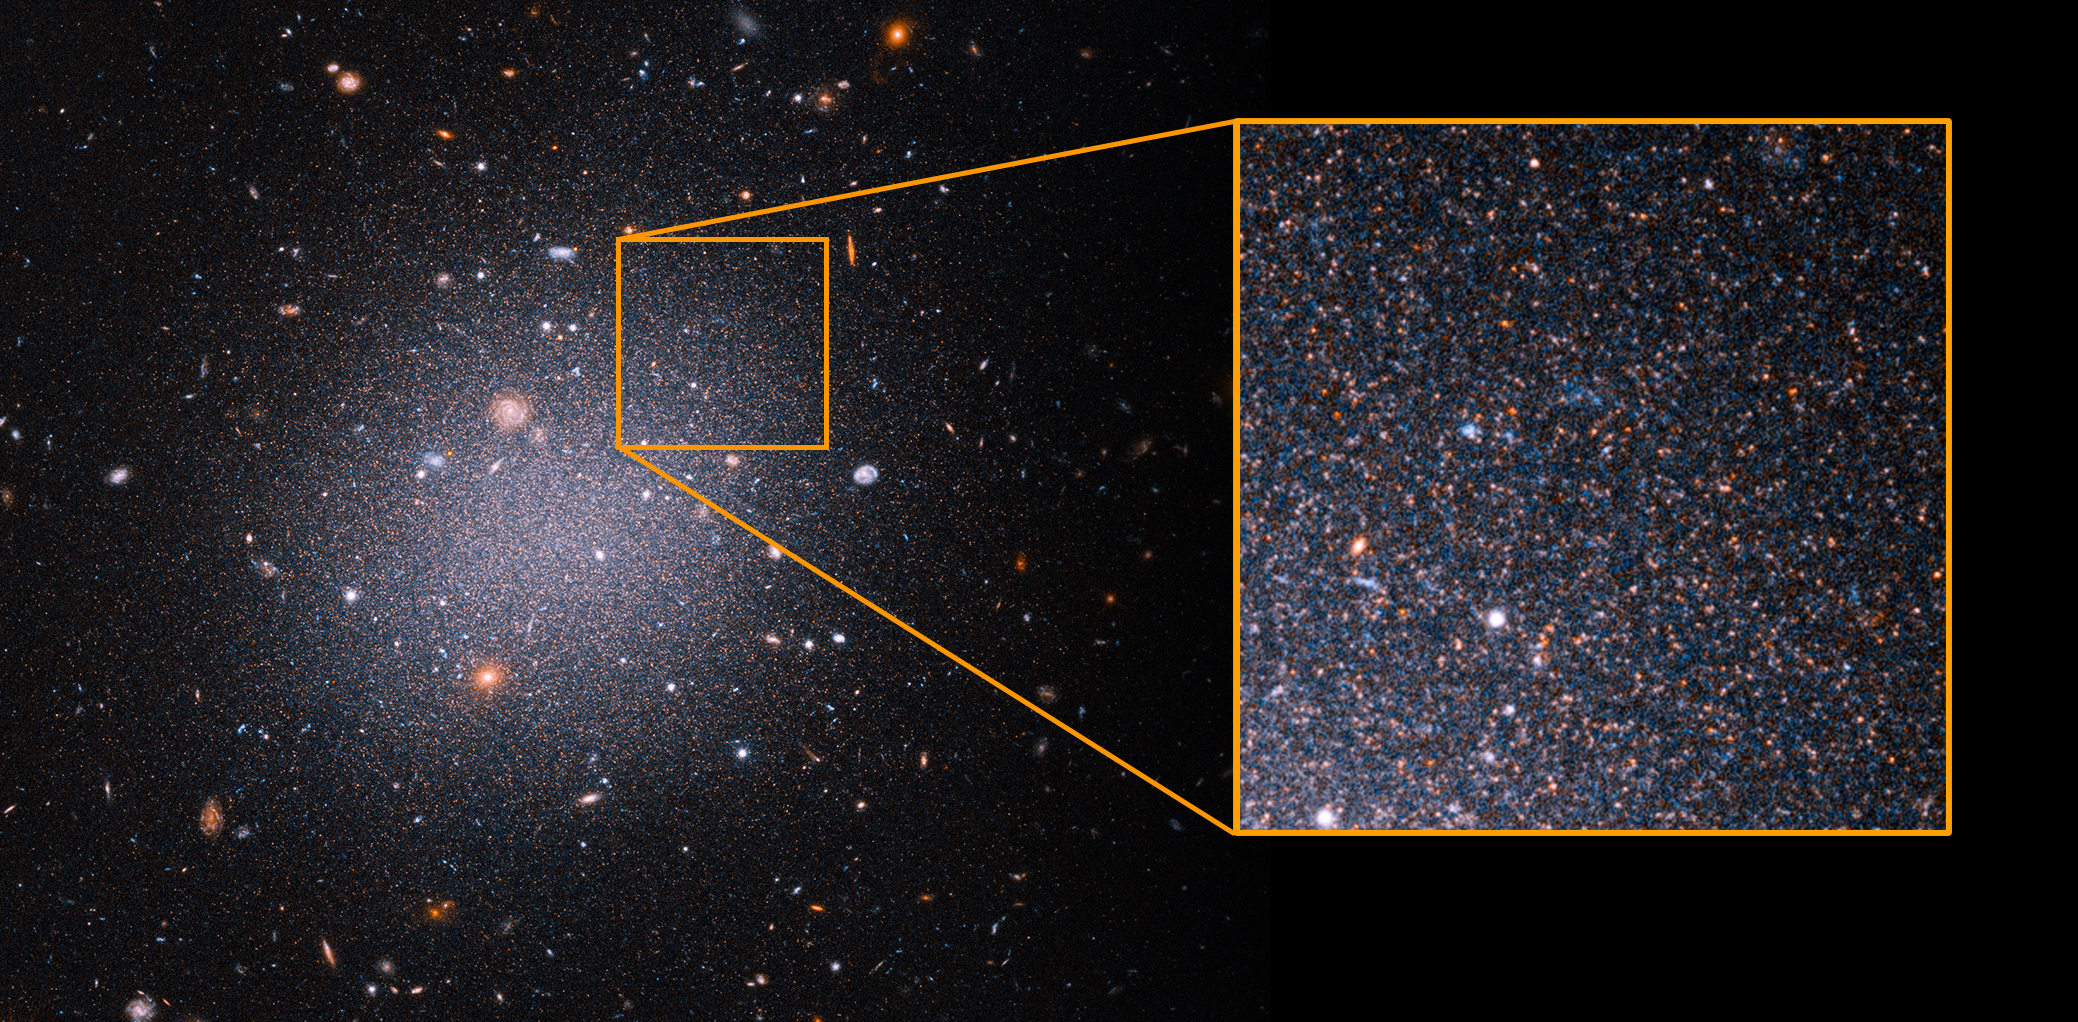 The most accurate distance measurement yet of ultra-diffuse galaxy (UDG) NGC1052-DF2 (DF2) confirms beyond any shadow of a doubt that it is lacking in